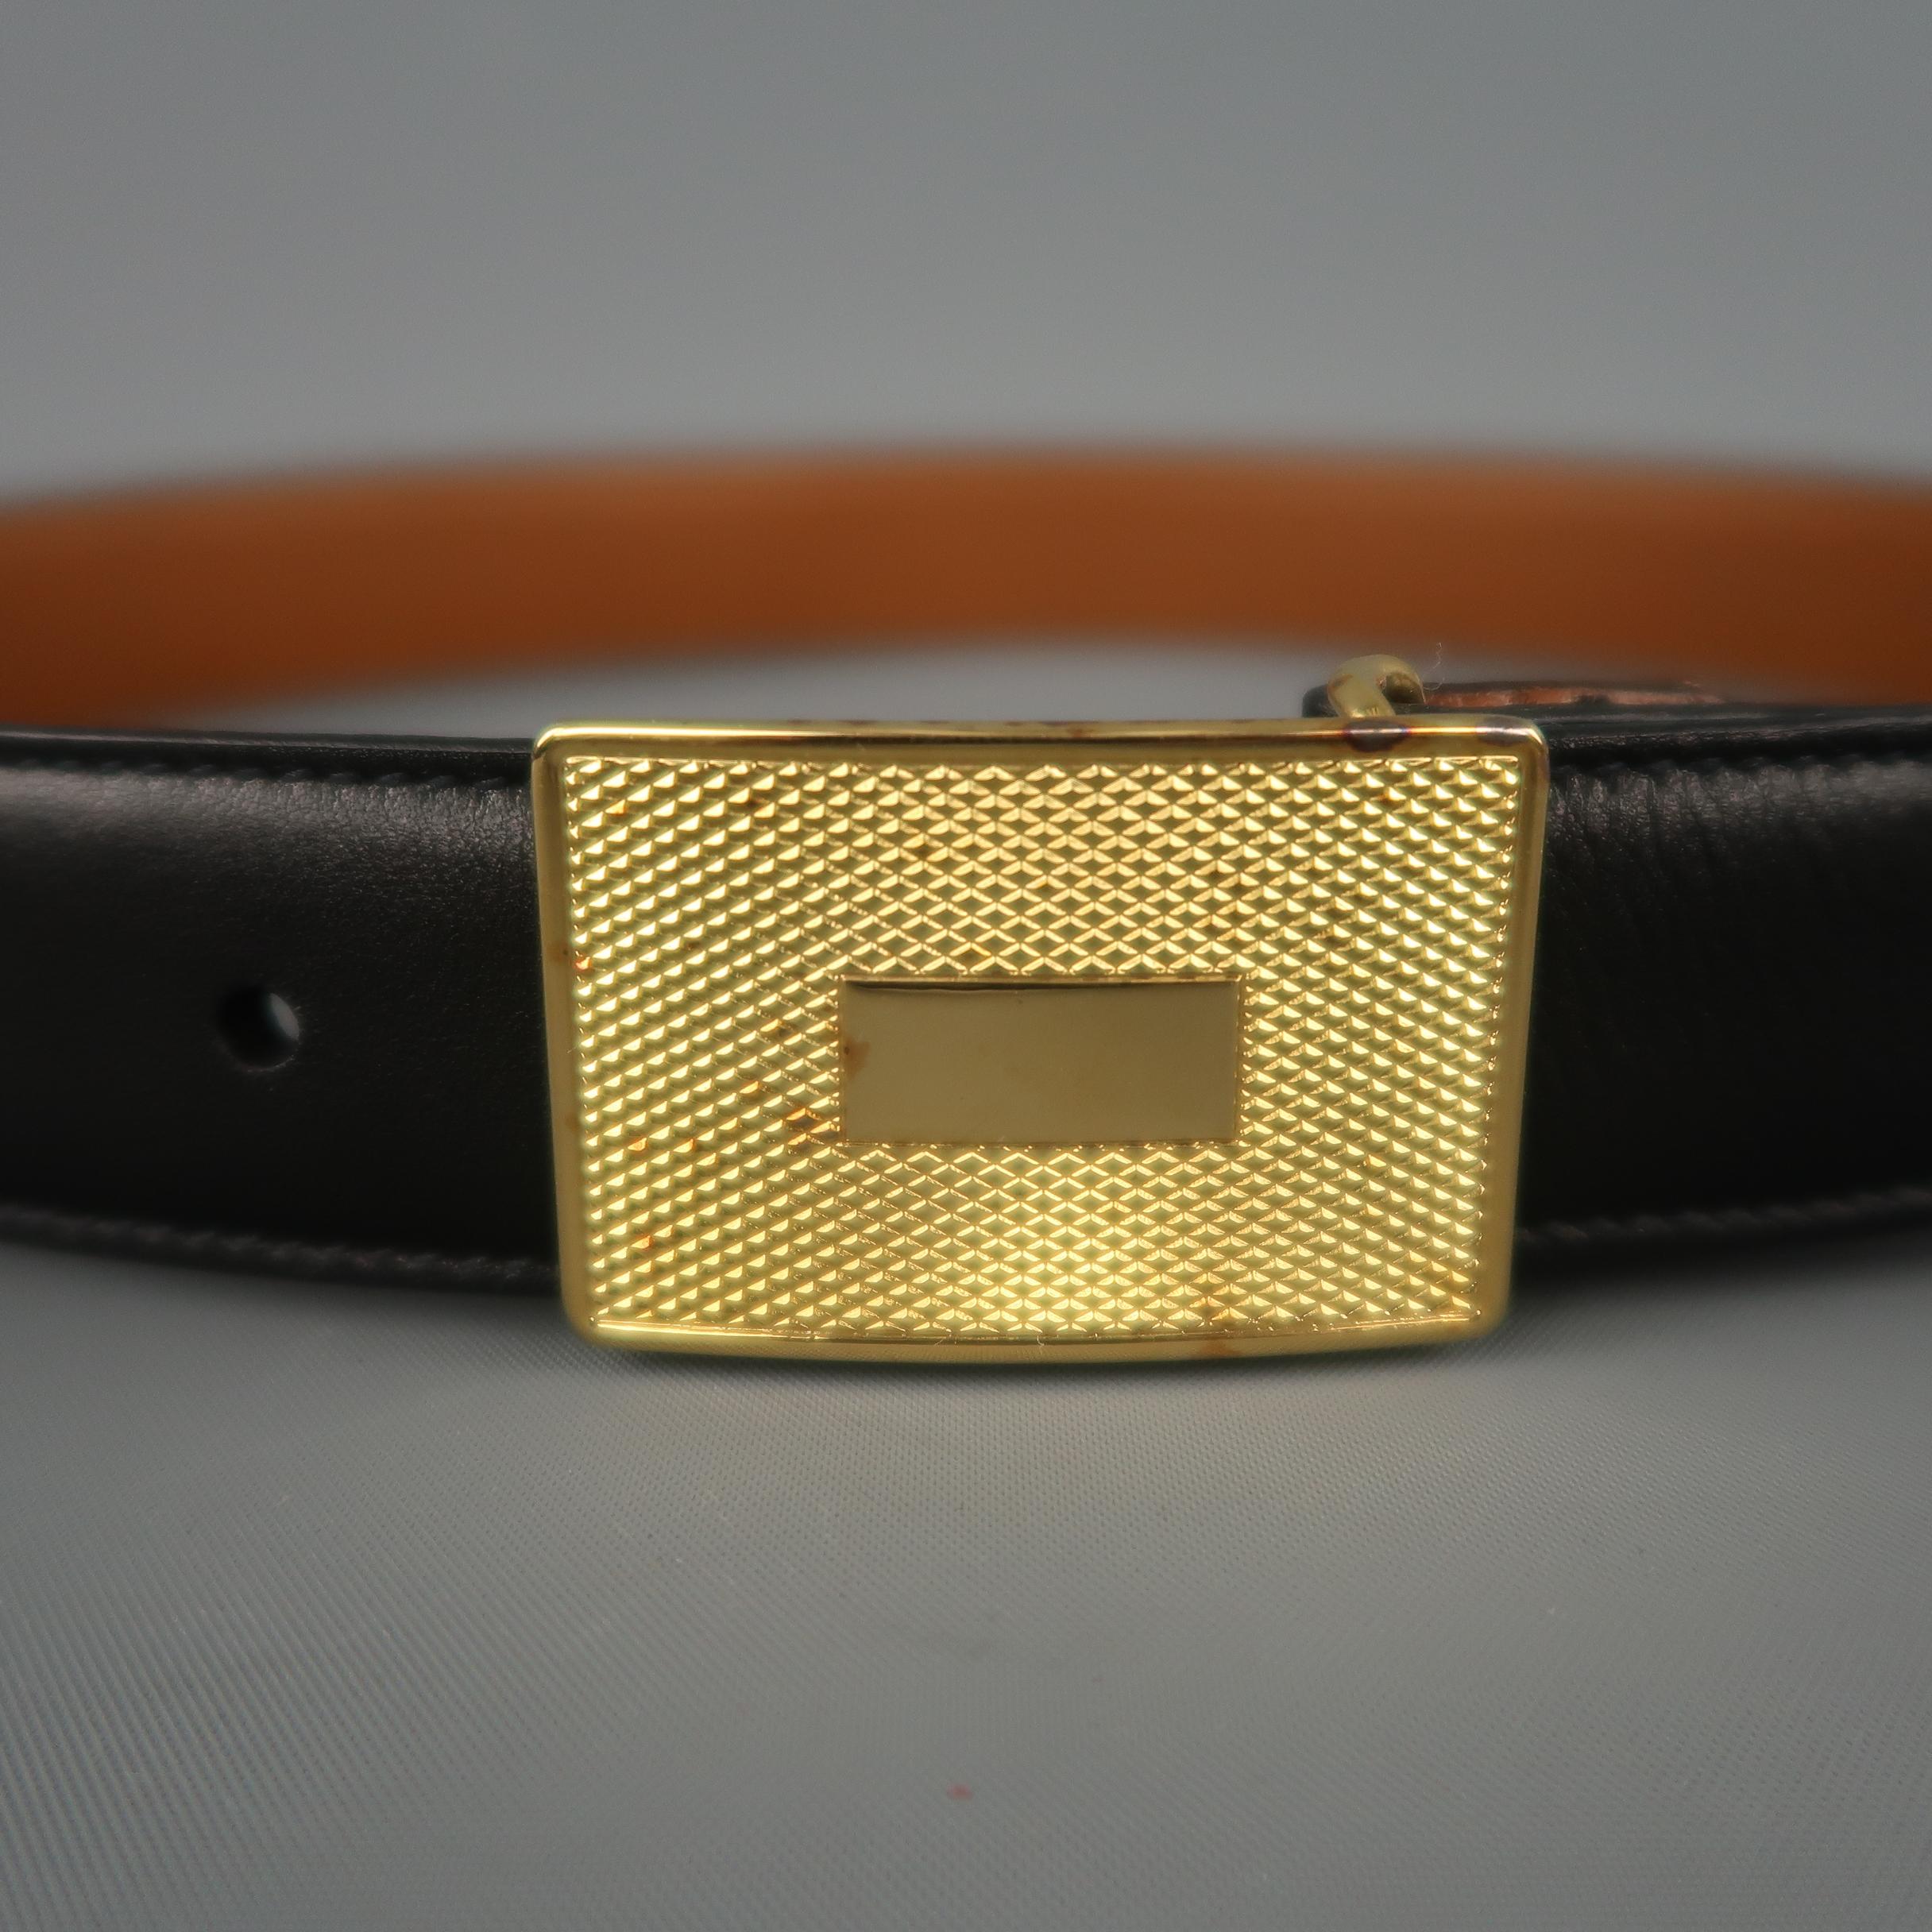 Vintage TRAFALGAR dress belt features a black strap with a yellow gold tone textured rectangular buckle. Aging on metal. As-is. Made in USA.
 
Very Good Pre-Owned Condition.
Marked: 30/75
 
Length: 34.5 in.
Width: 1.05 in.
Fits: 27.5-30.5 in.